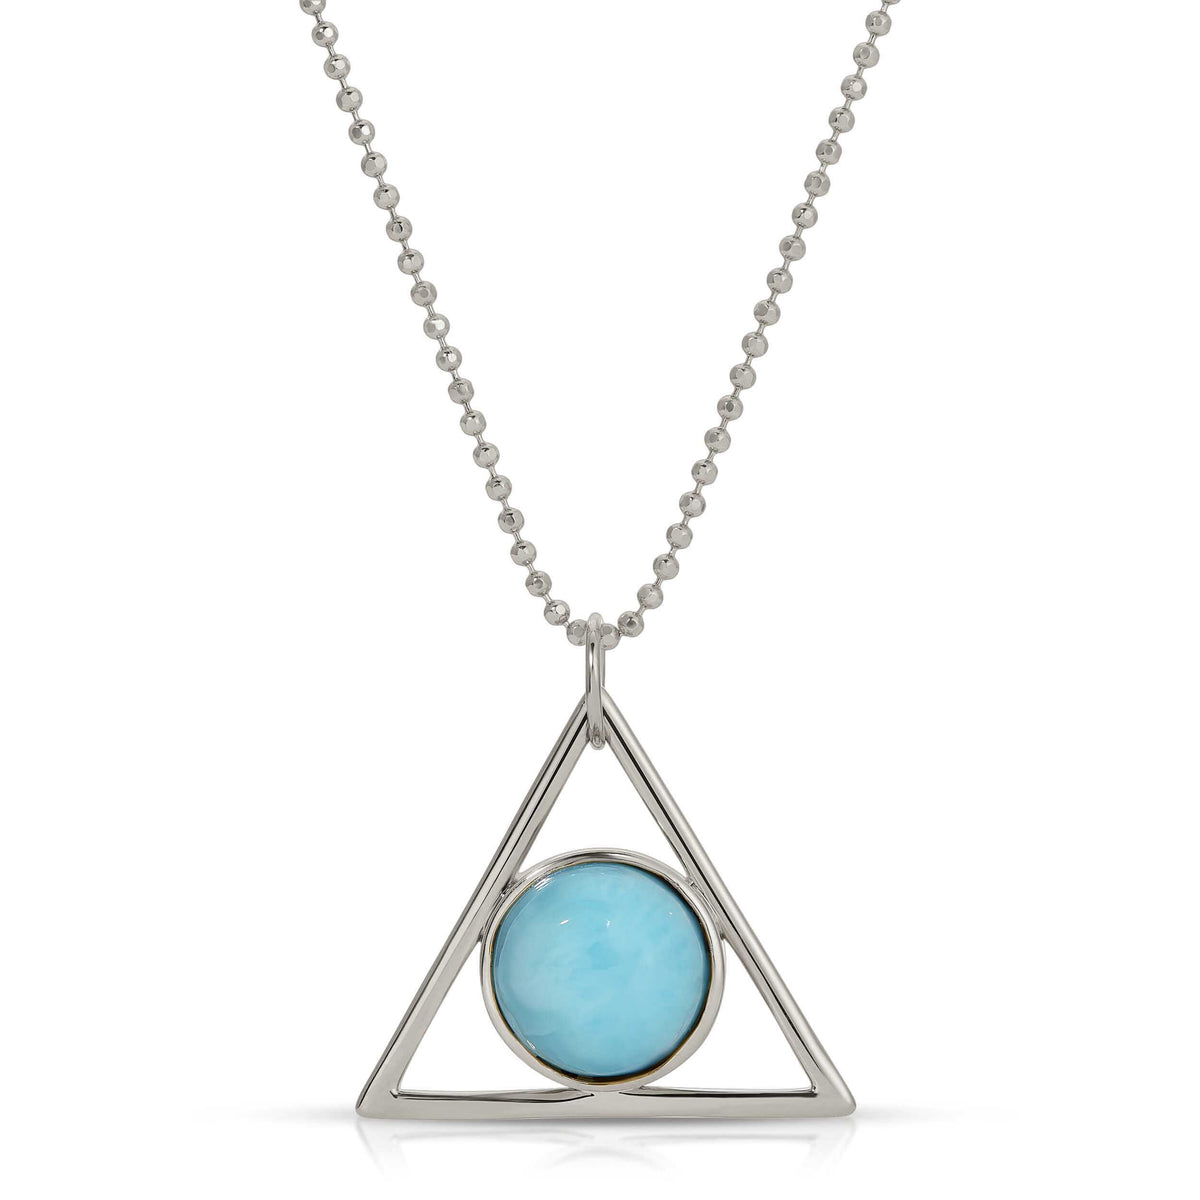 Two Faced Larimar / Moonstone Necklace